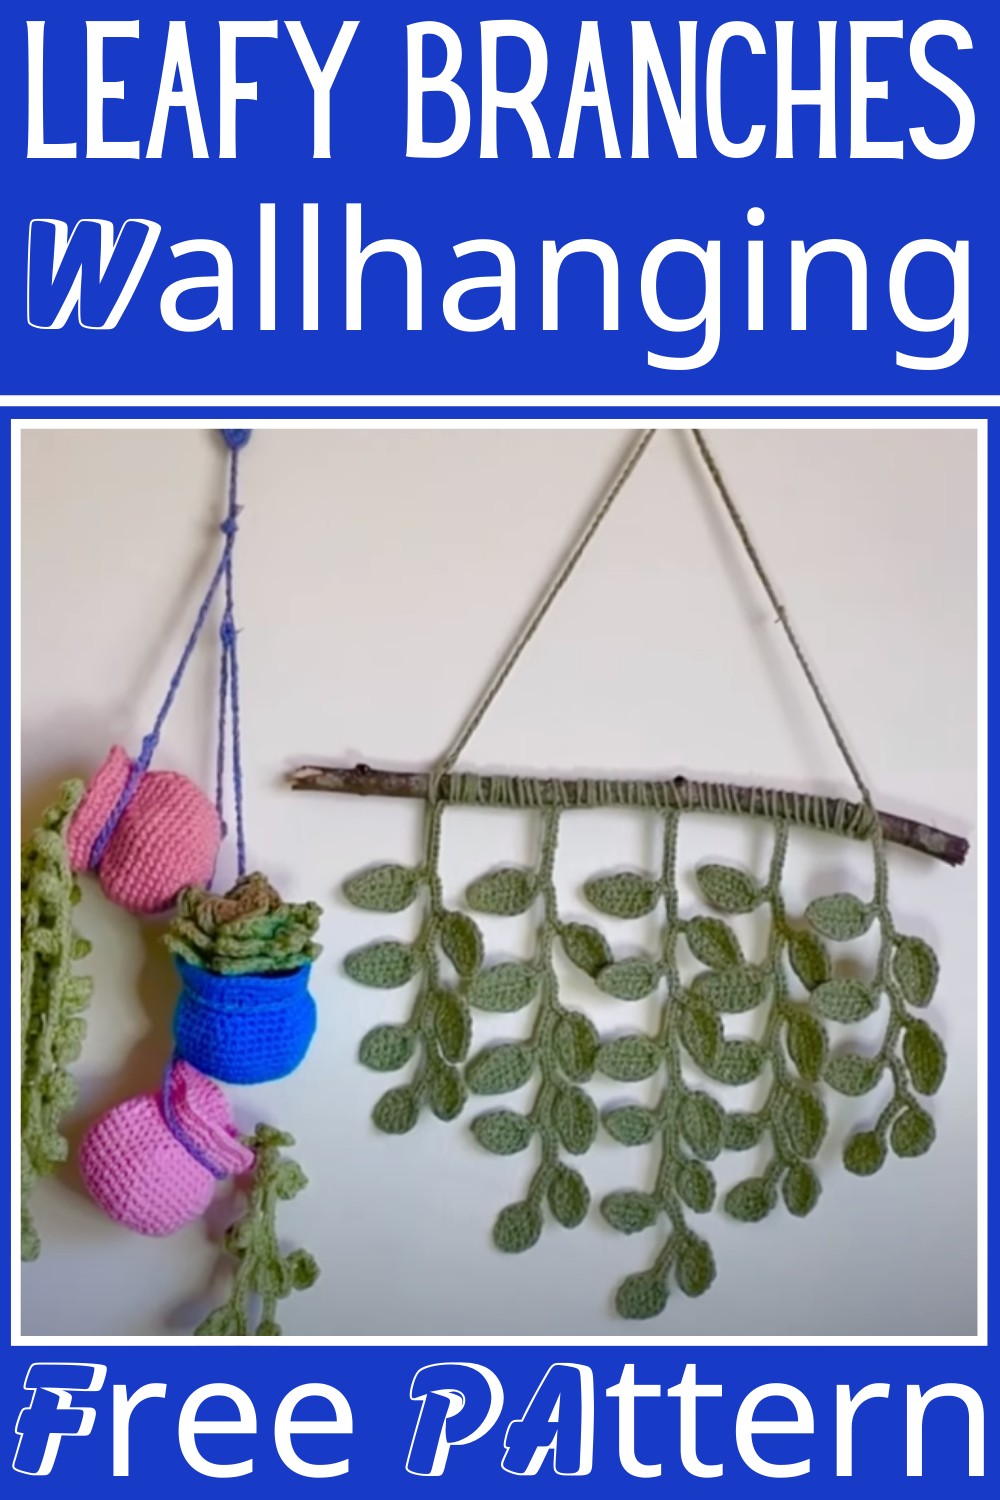 Crochet Leafy Branches Wallhanging